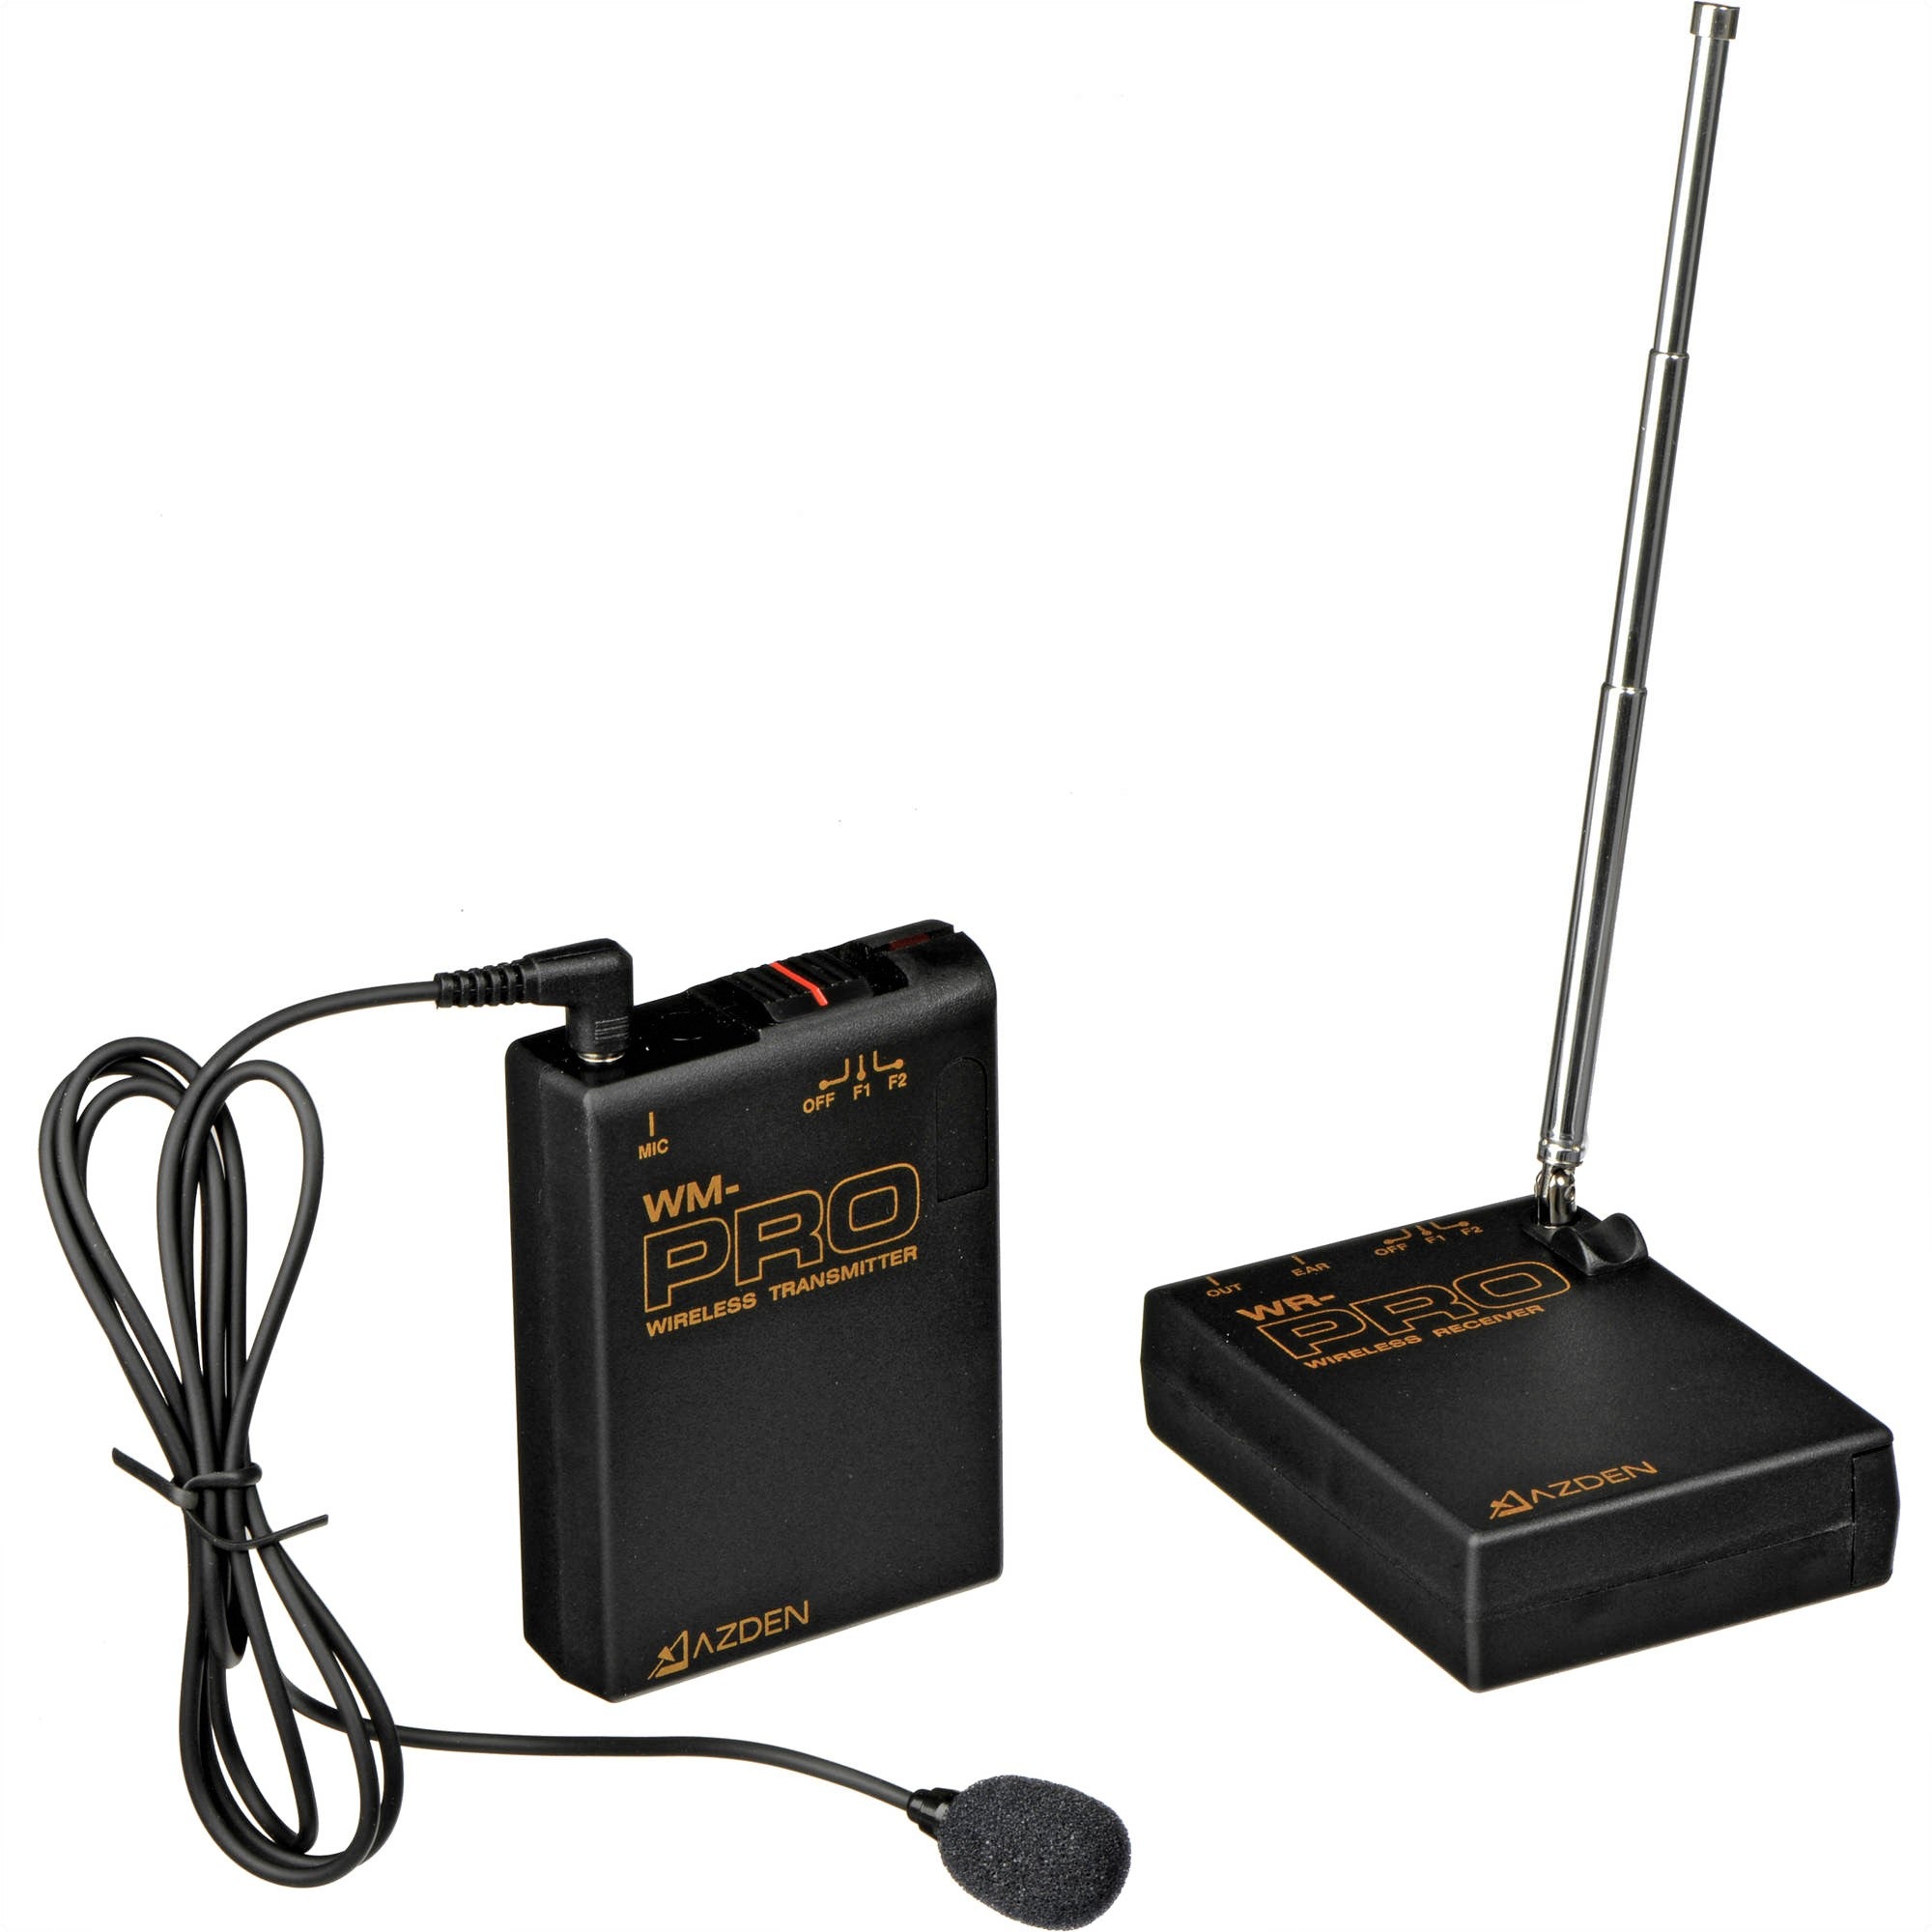 Azden Bodypack Transmitter and Wireless Receiver with Omni Lavalier Mic (169 & 170 MHz)